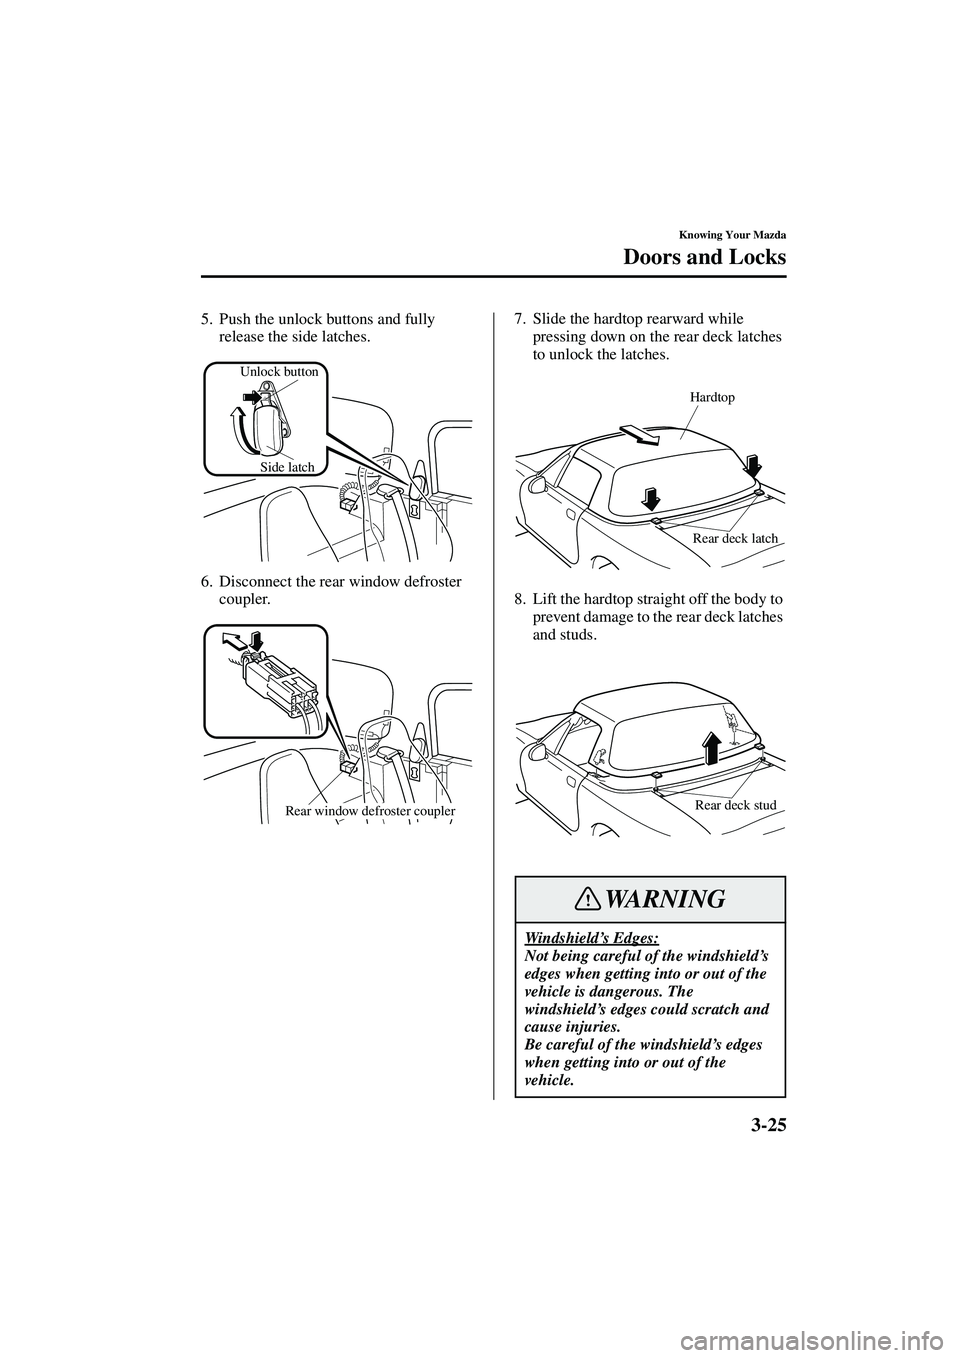 MAZDA MODEL MX-5 MIATA 2004 Repair Manual 3-25
Knowing Your Mazda
Doors and Locks
Form No. 8S15-EA-03G
5. Push the unlock buttons and fully release the side latches.
6. Disconnect the rear window defroster  coupler. 7. Slide the hardtop rearw